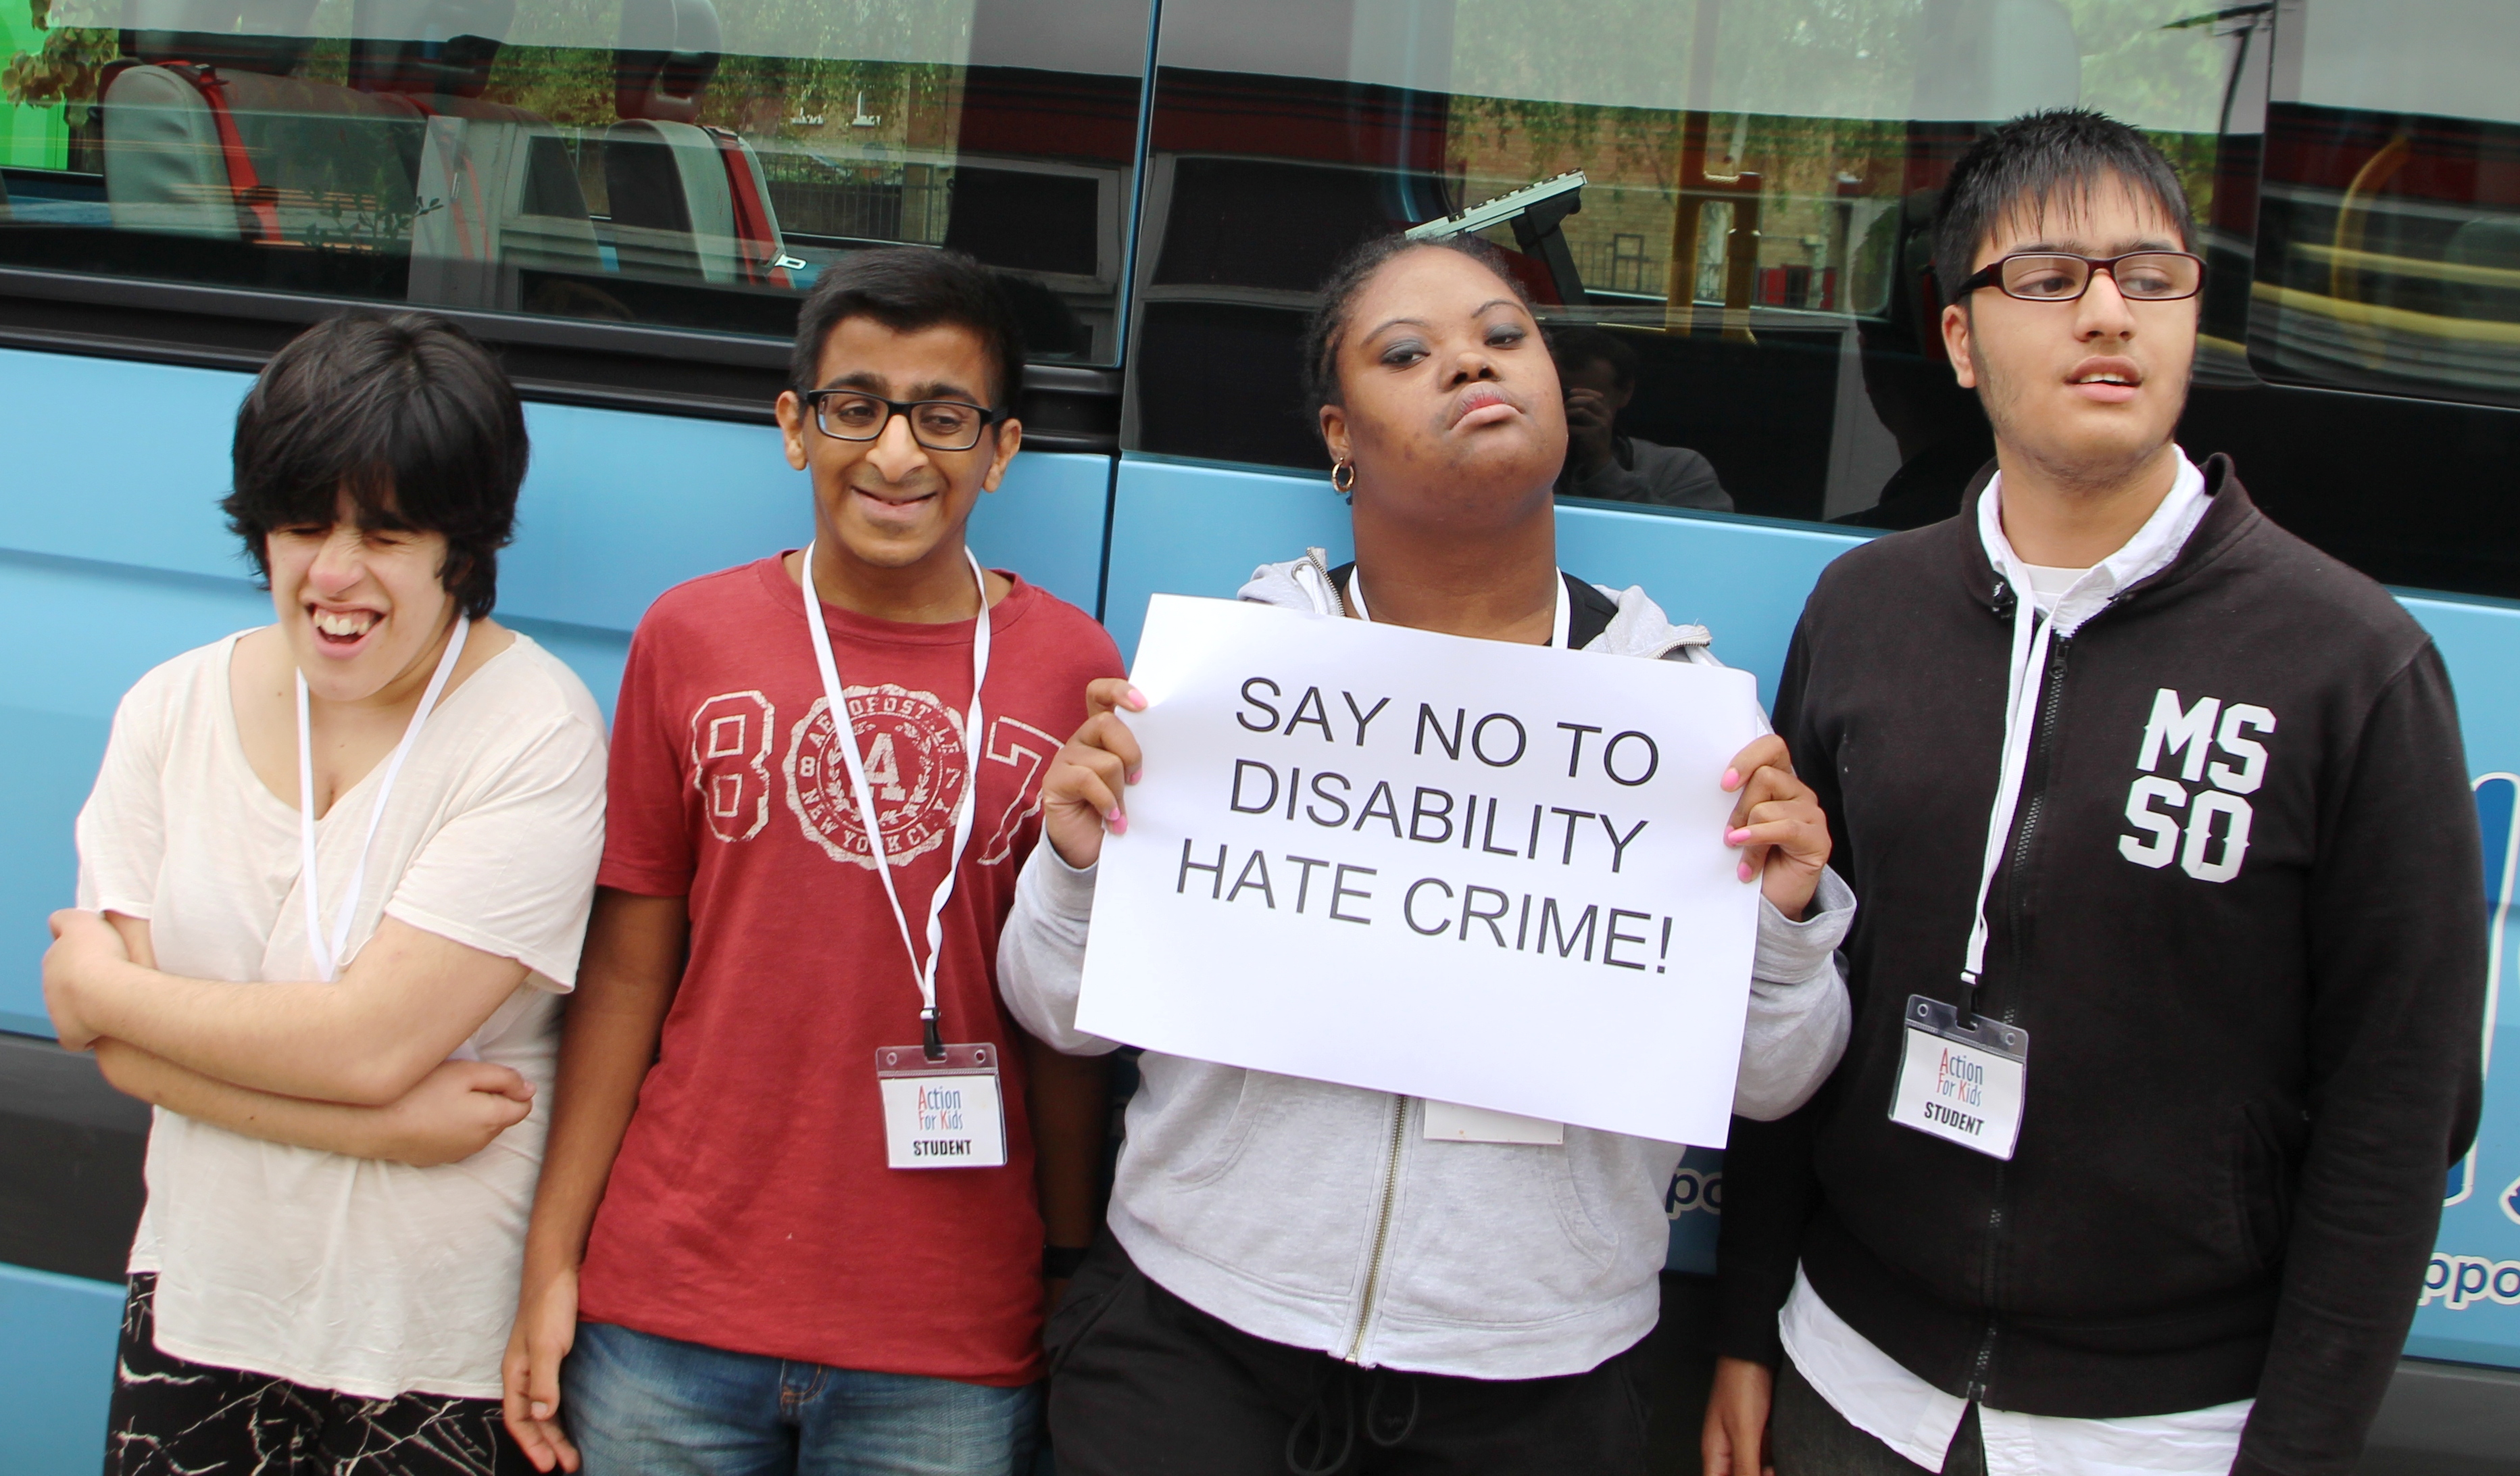 Four young people with learning disabilities, one holding a sign saying "no to disability hate crime"